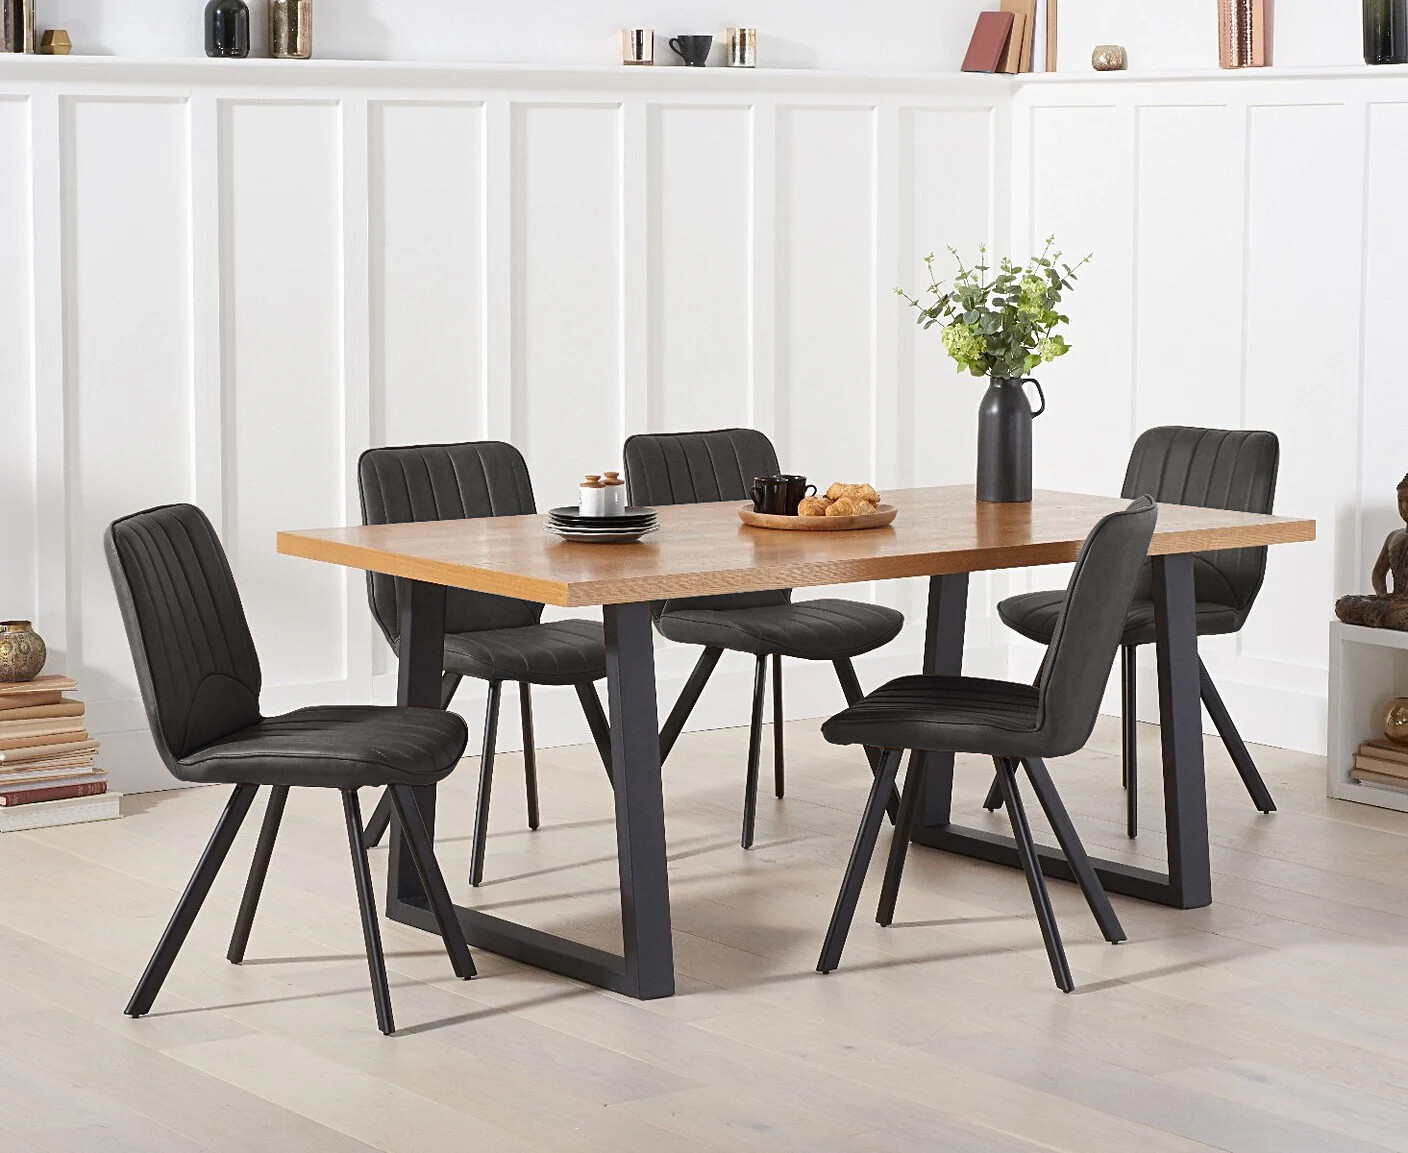 Photo 1 of Urban 180cm industrial dining table with 6 brown hendrick faux leather chairs